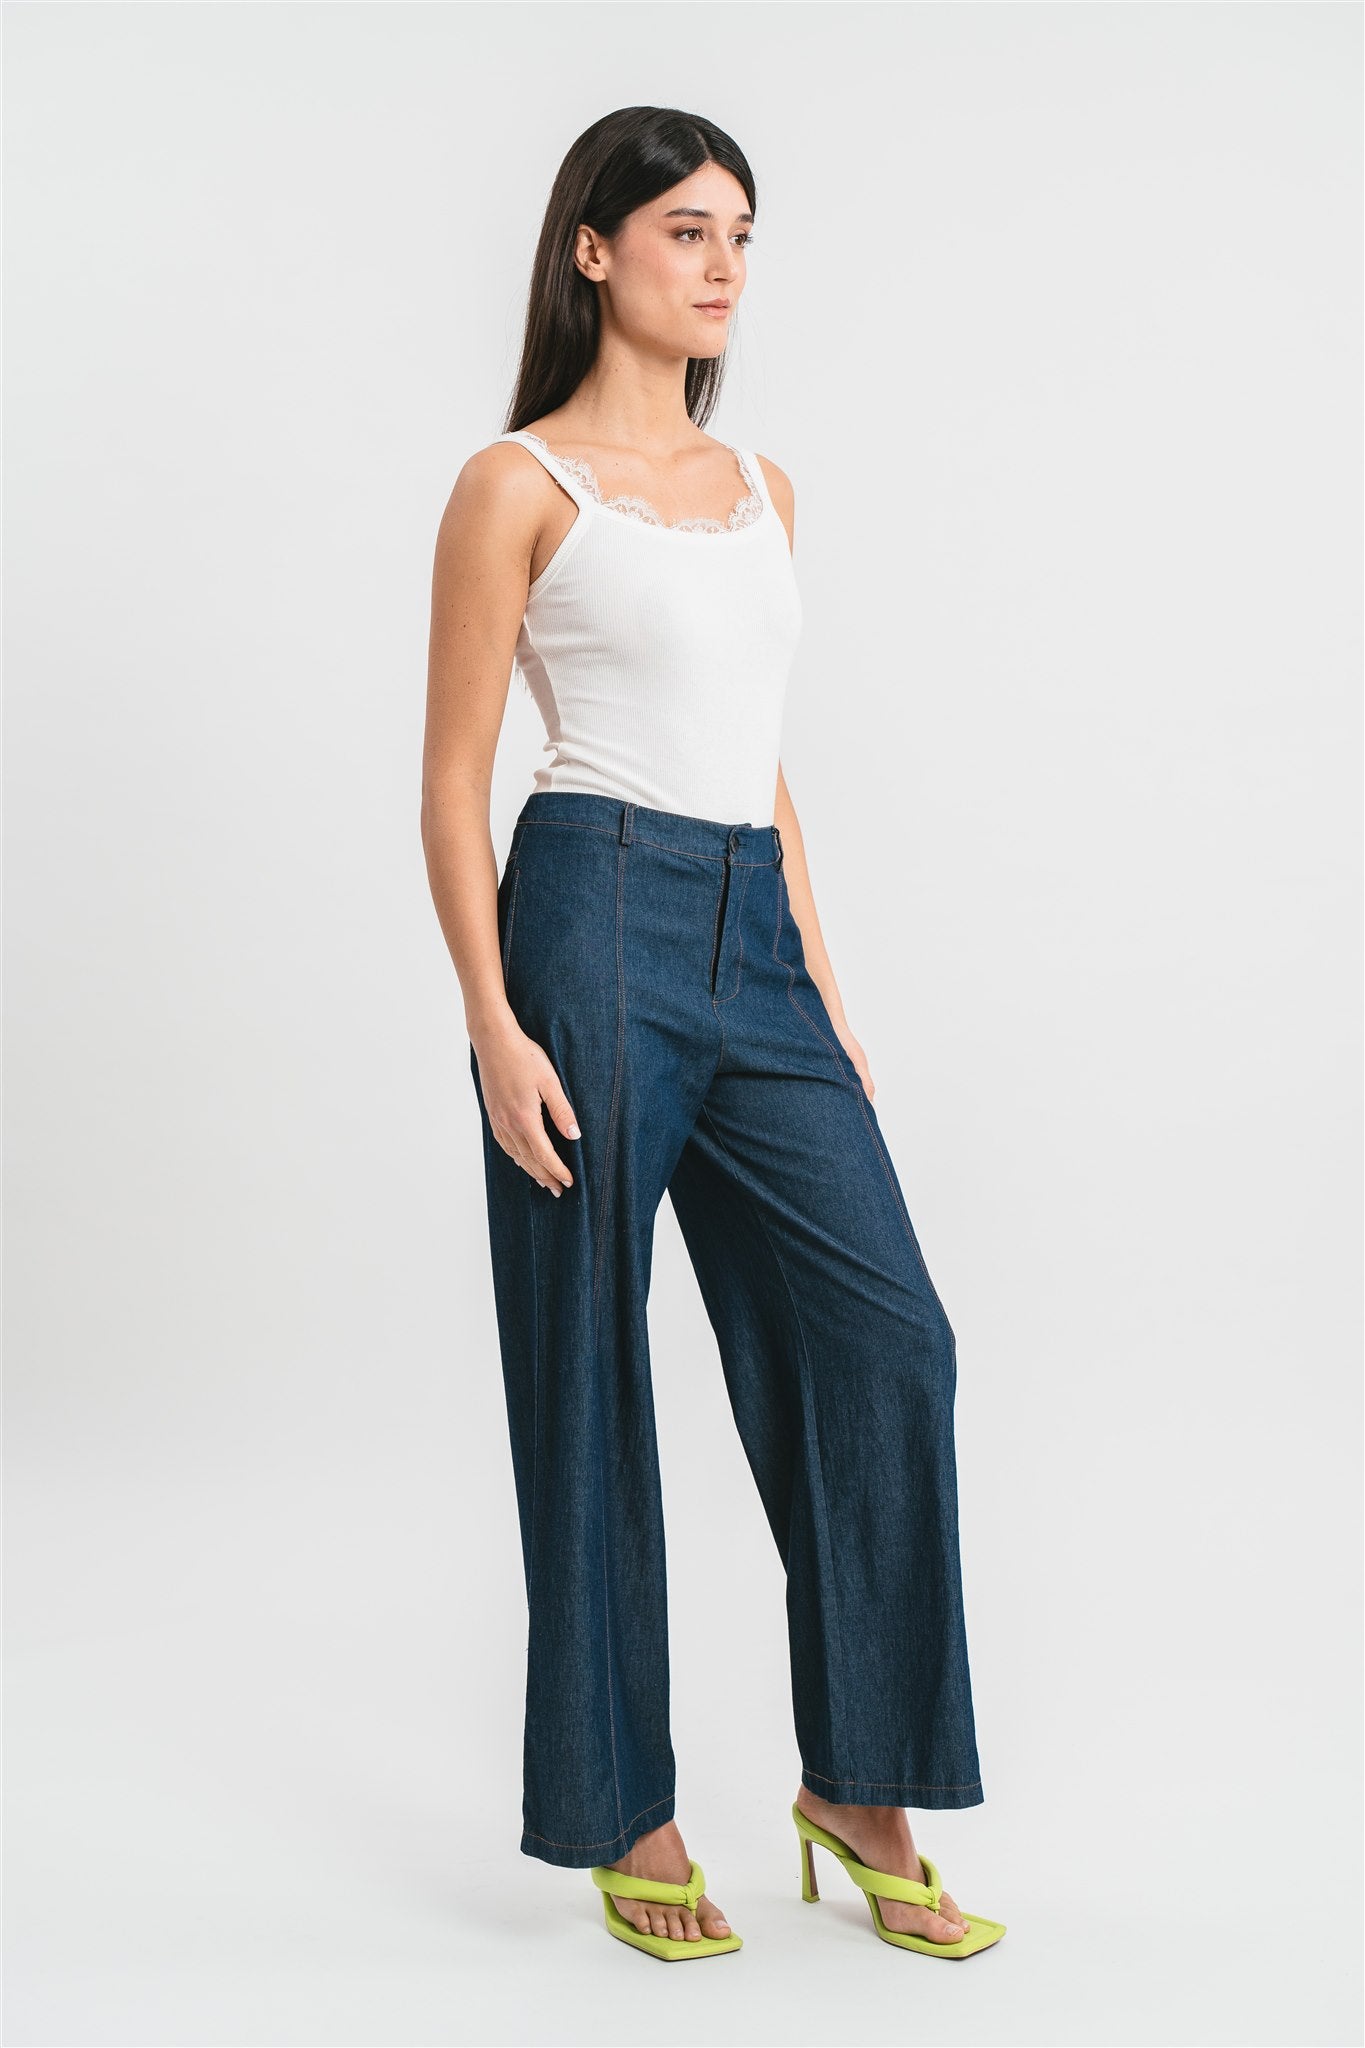 Lightweight denim trousers with contrasting lace